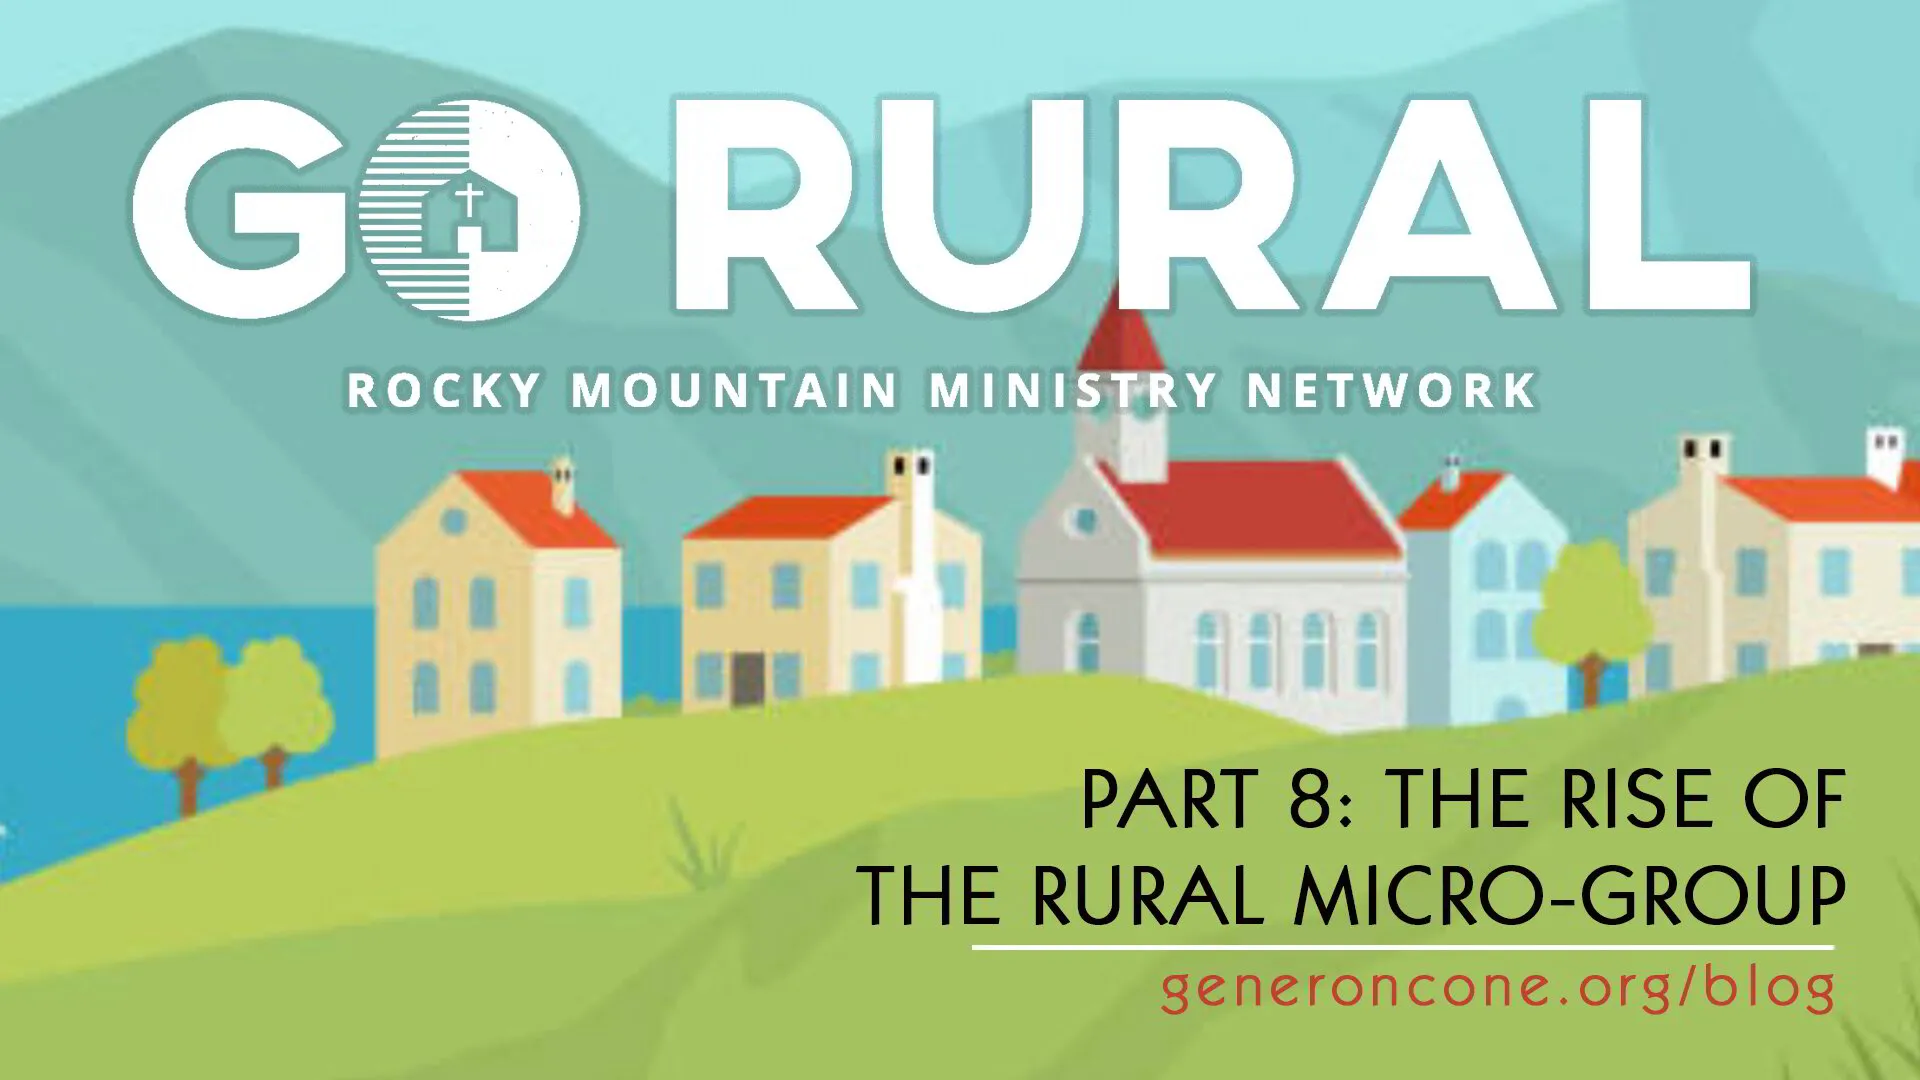 Go Rural, Part 8: The Rise of the Rural Micro-group